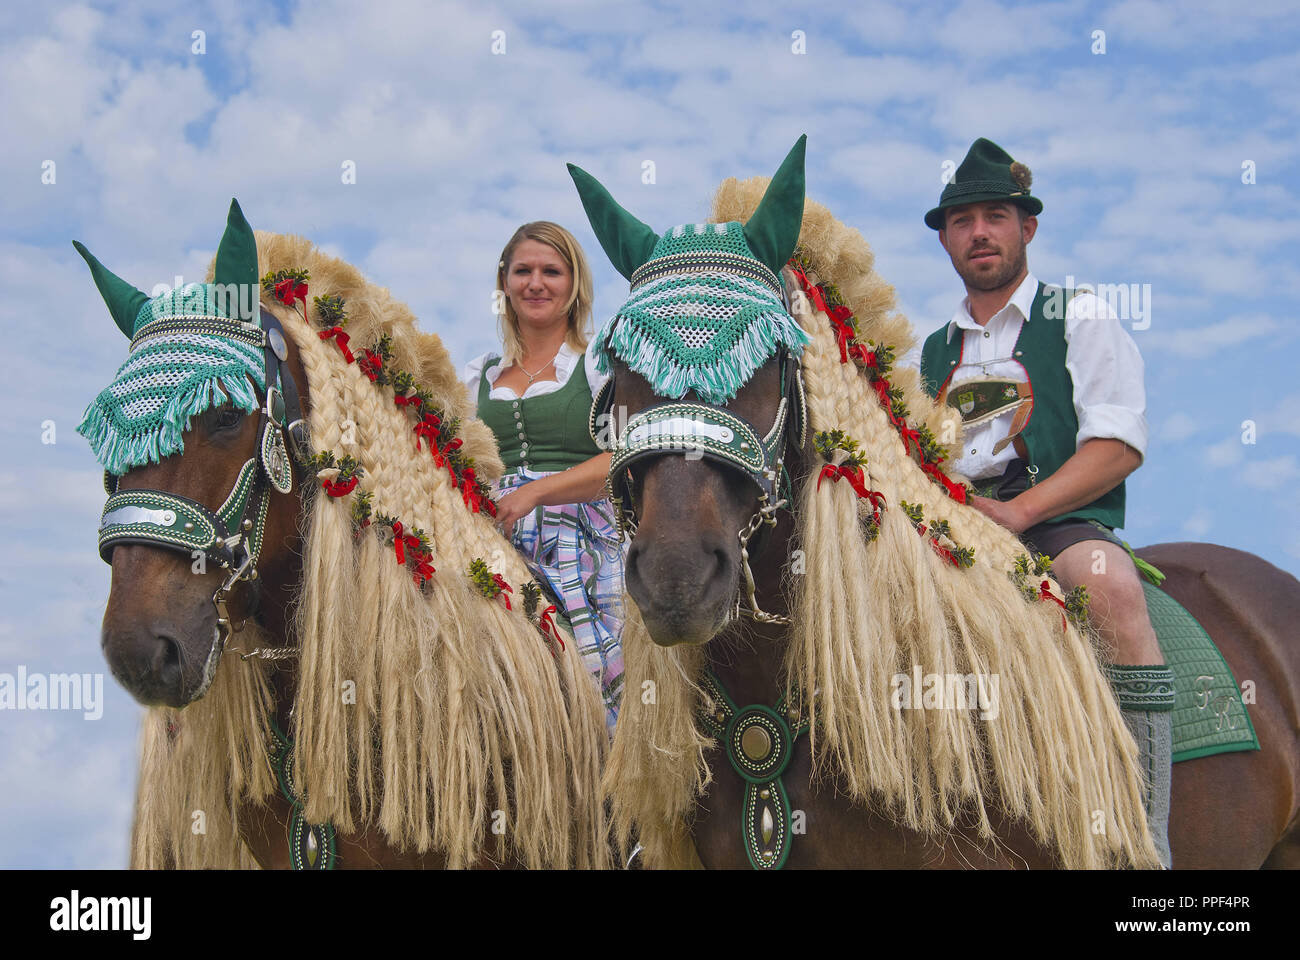 Riders with draft horses at the Leonhardiritt (St. Leonard's Ride) in Holzhausen at Teisendorf, Upper Bavaria. The procession where the beautifully decorated horses are blessed, was first mentioned in 1612. Stock Photo